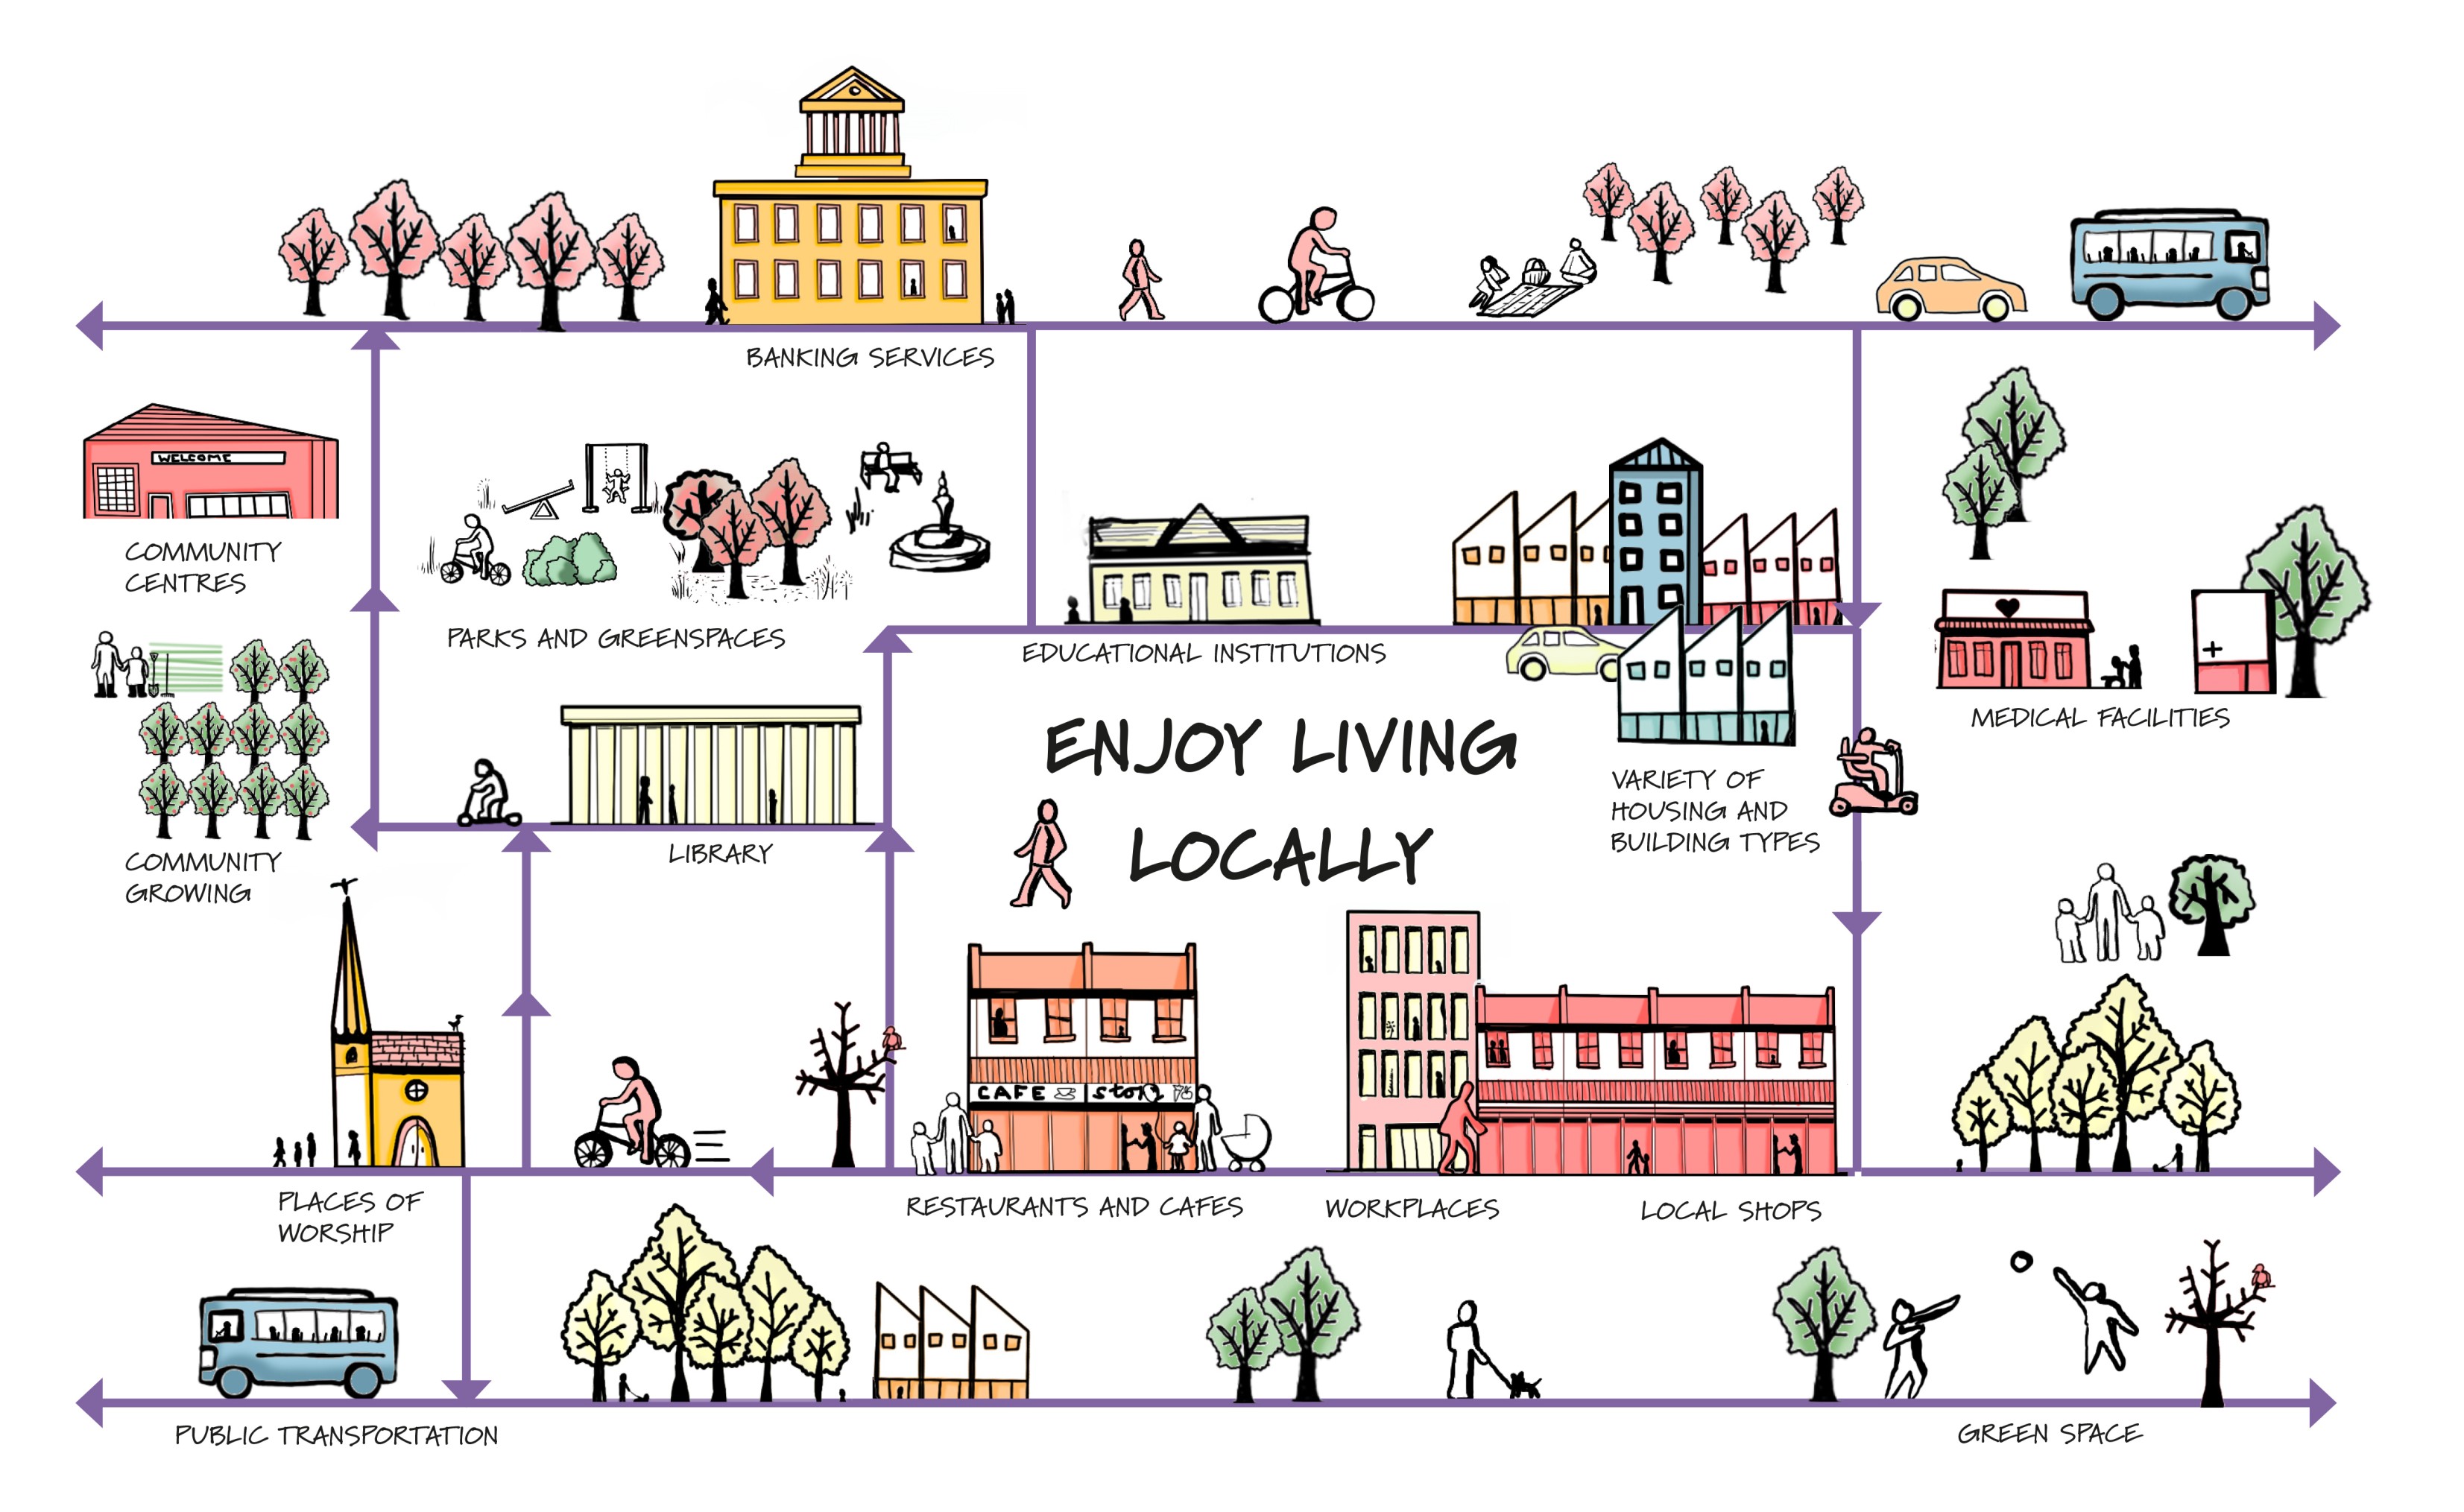 New guide launched on how to create 20-minute neighbourhoods